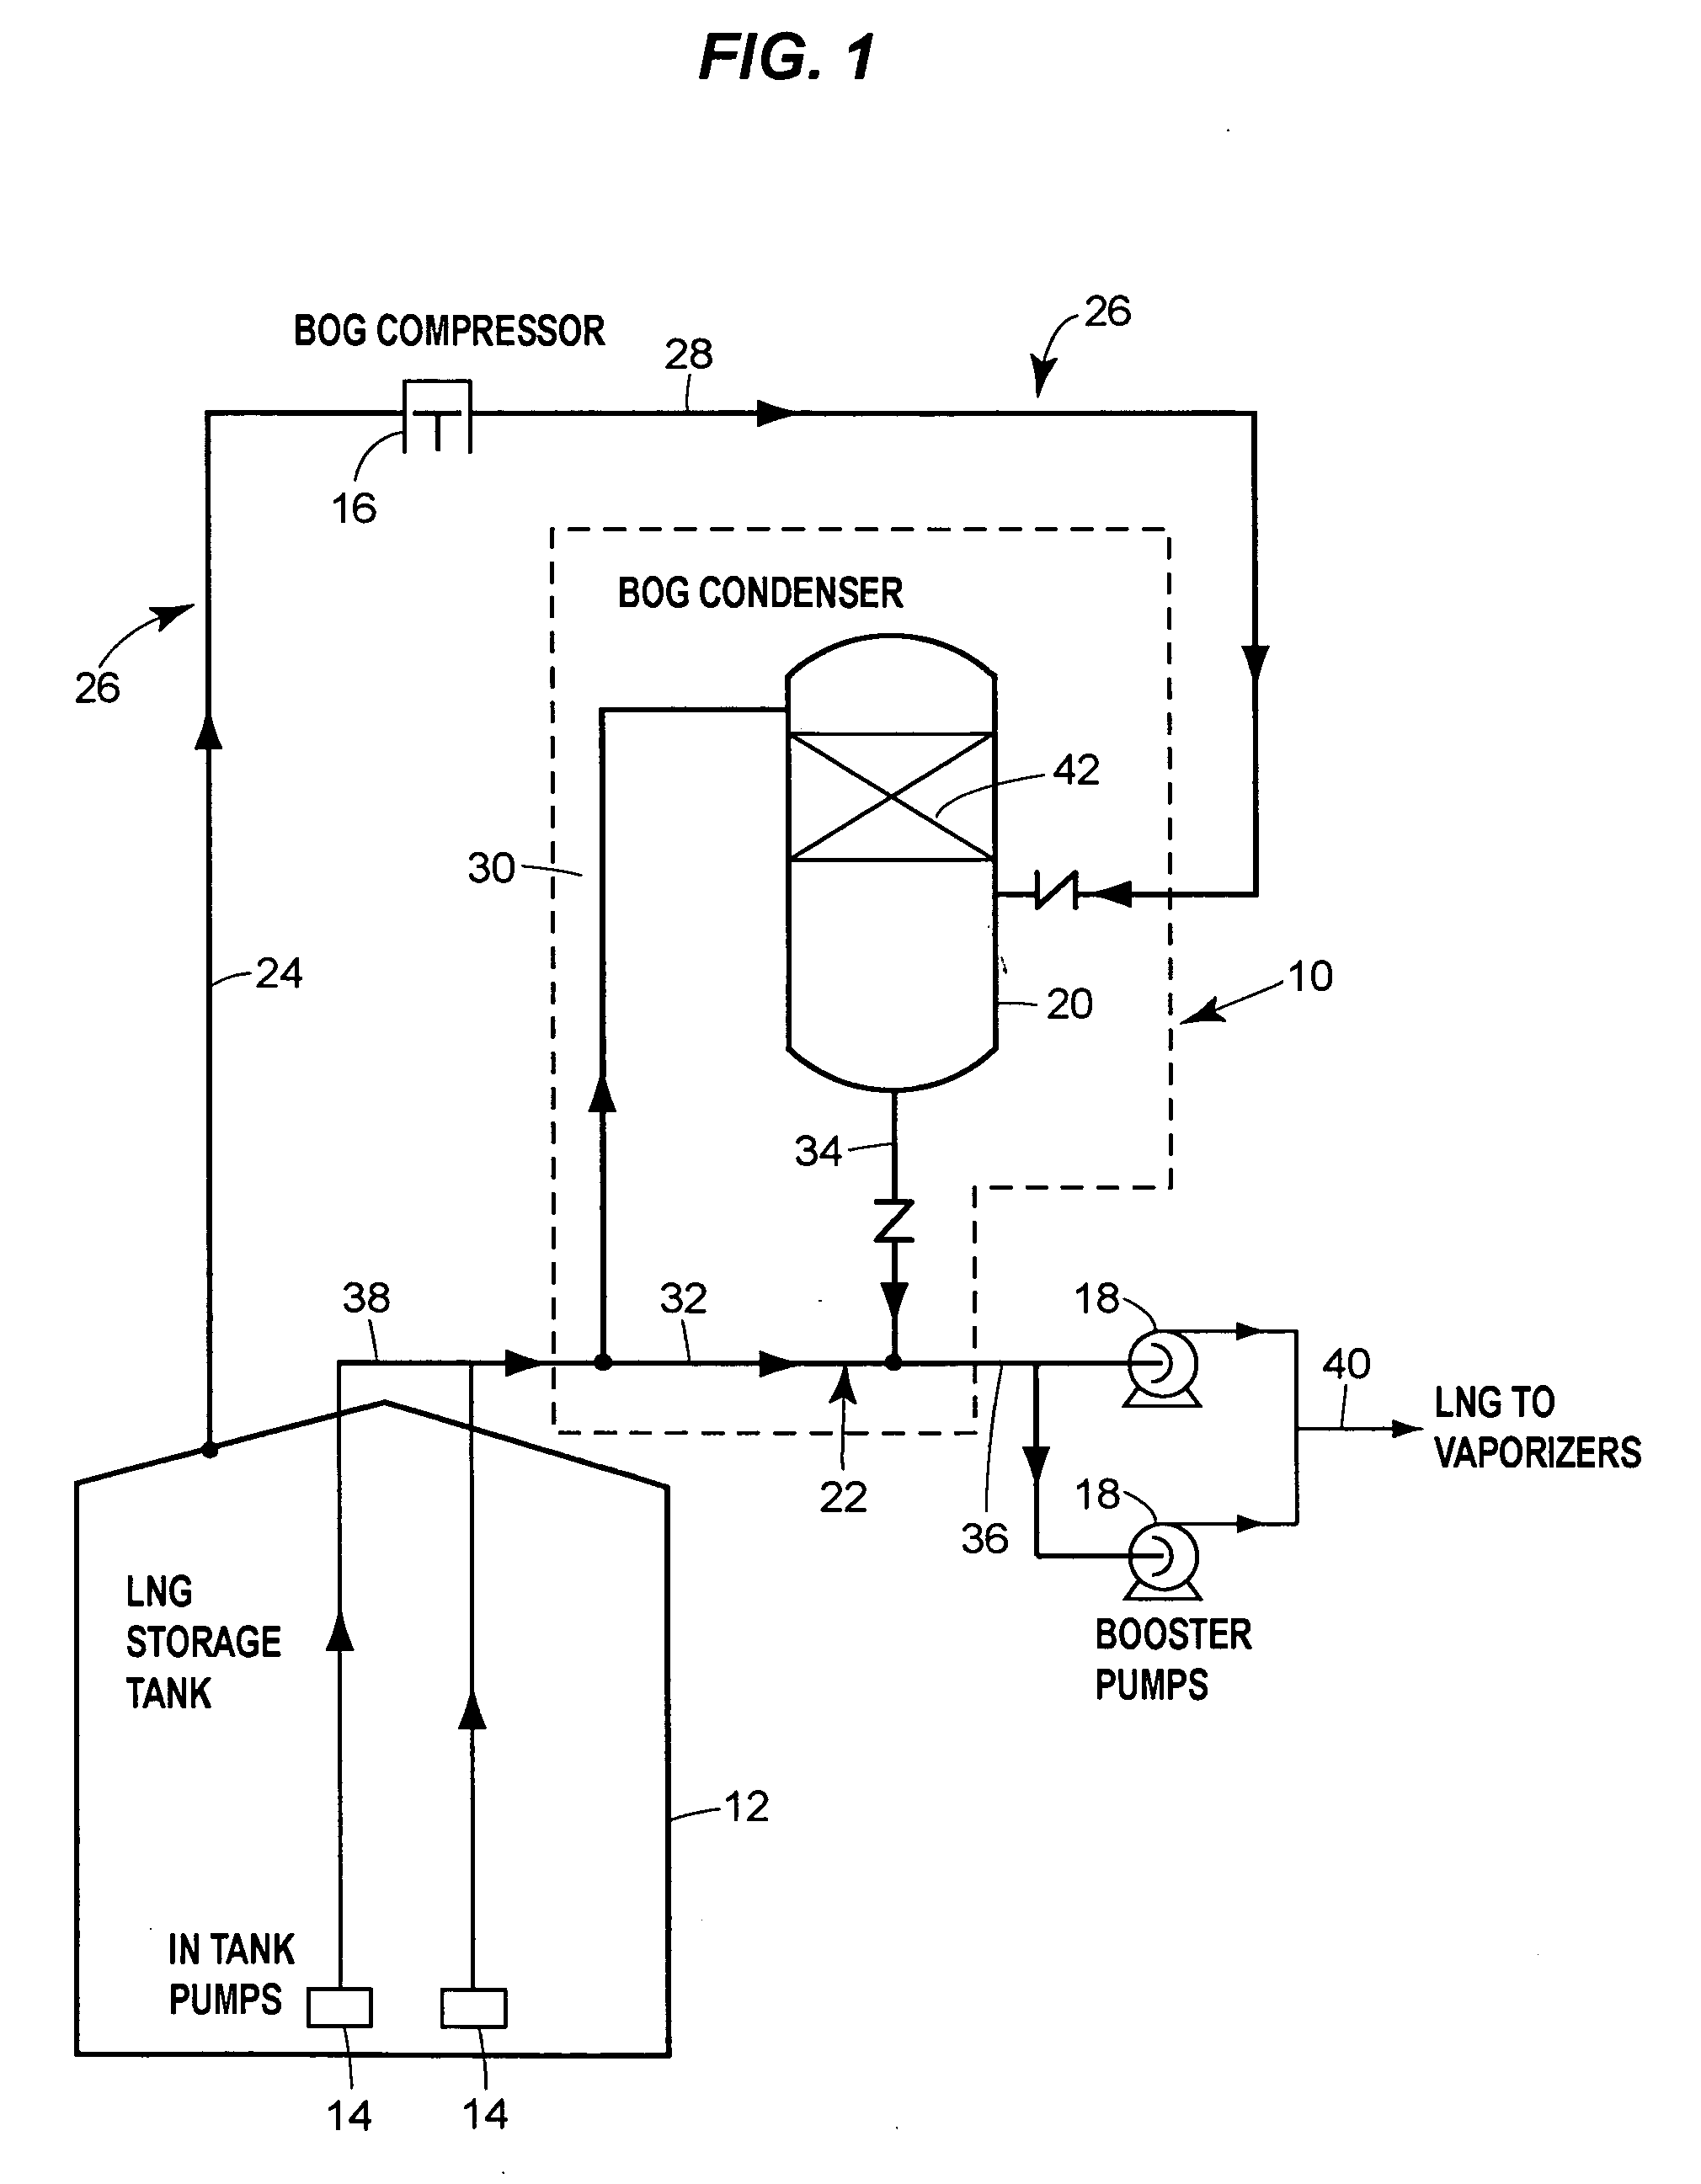 Boil-off gas condensing assembly for use with liquid storage tanks